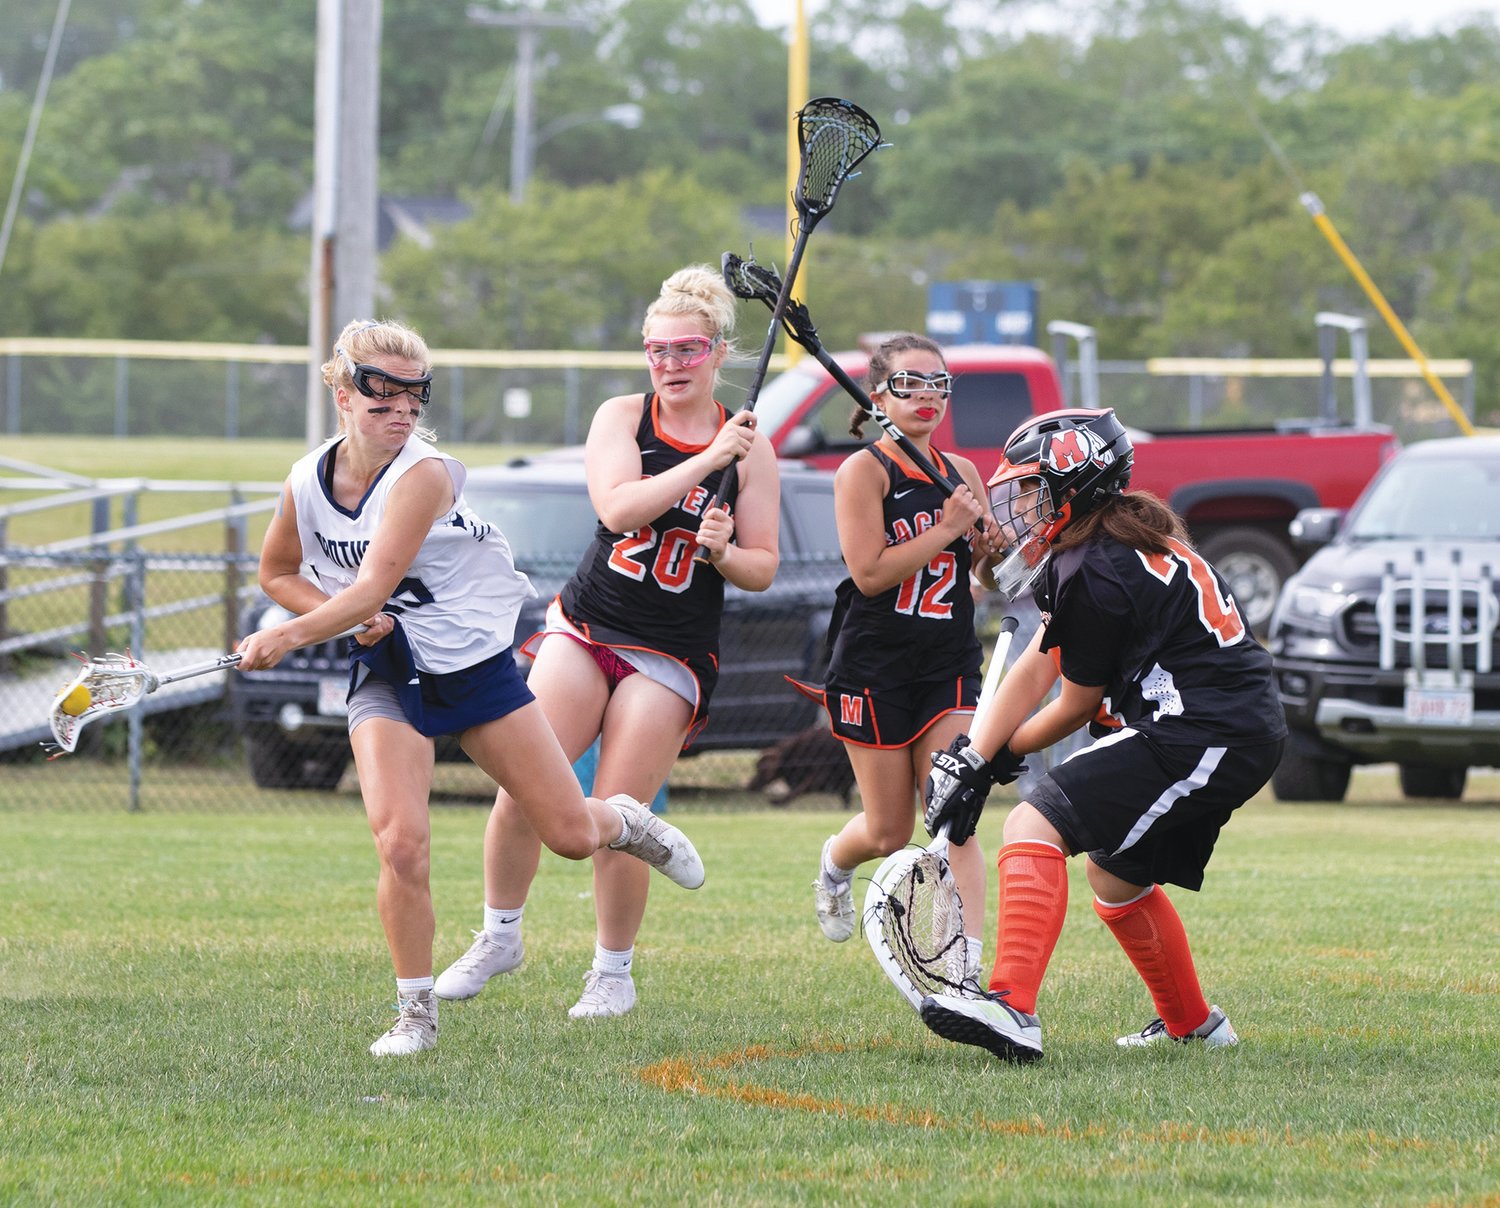 Bailey Lower rips a shot on net in Nantucket's 19-3 opening-round playoff win over Middleboro Monday.